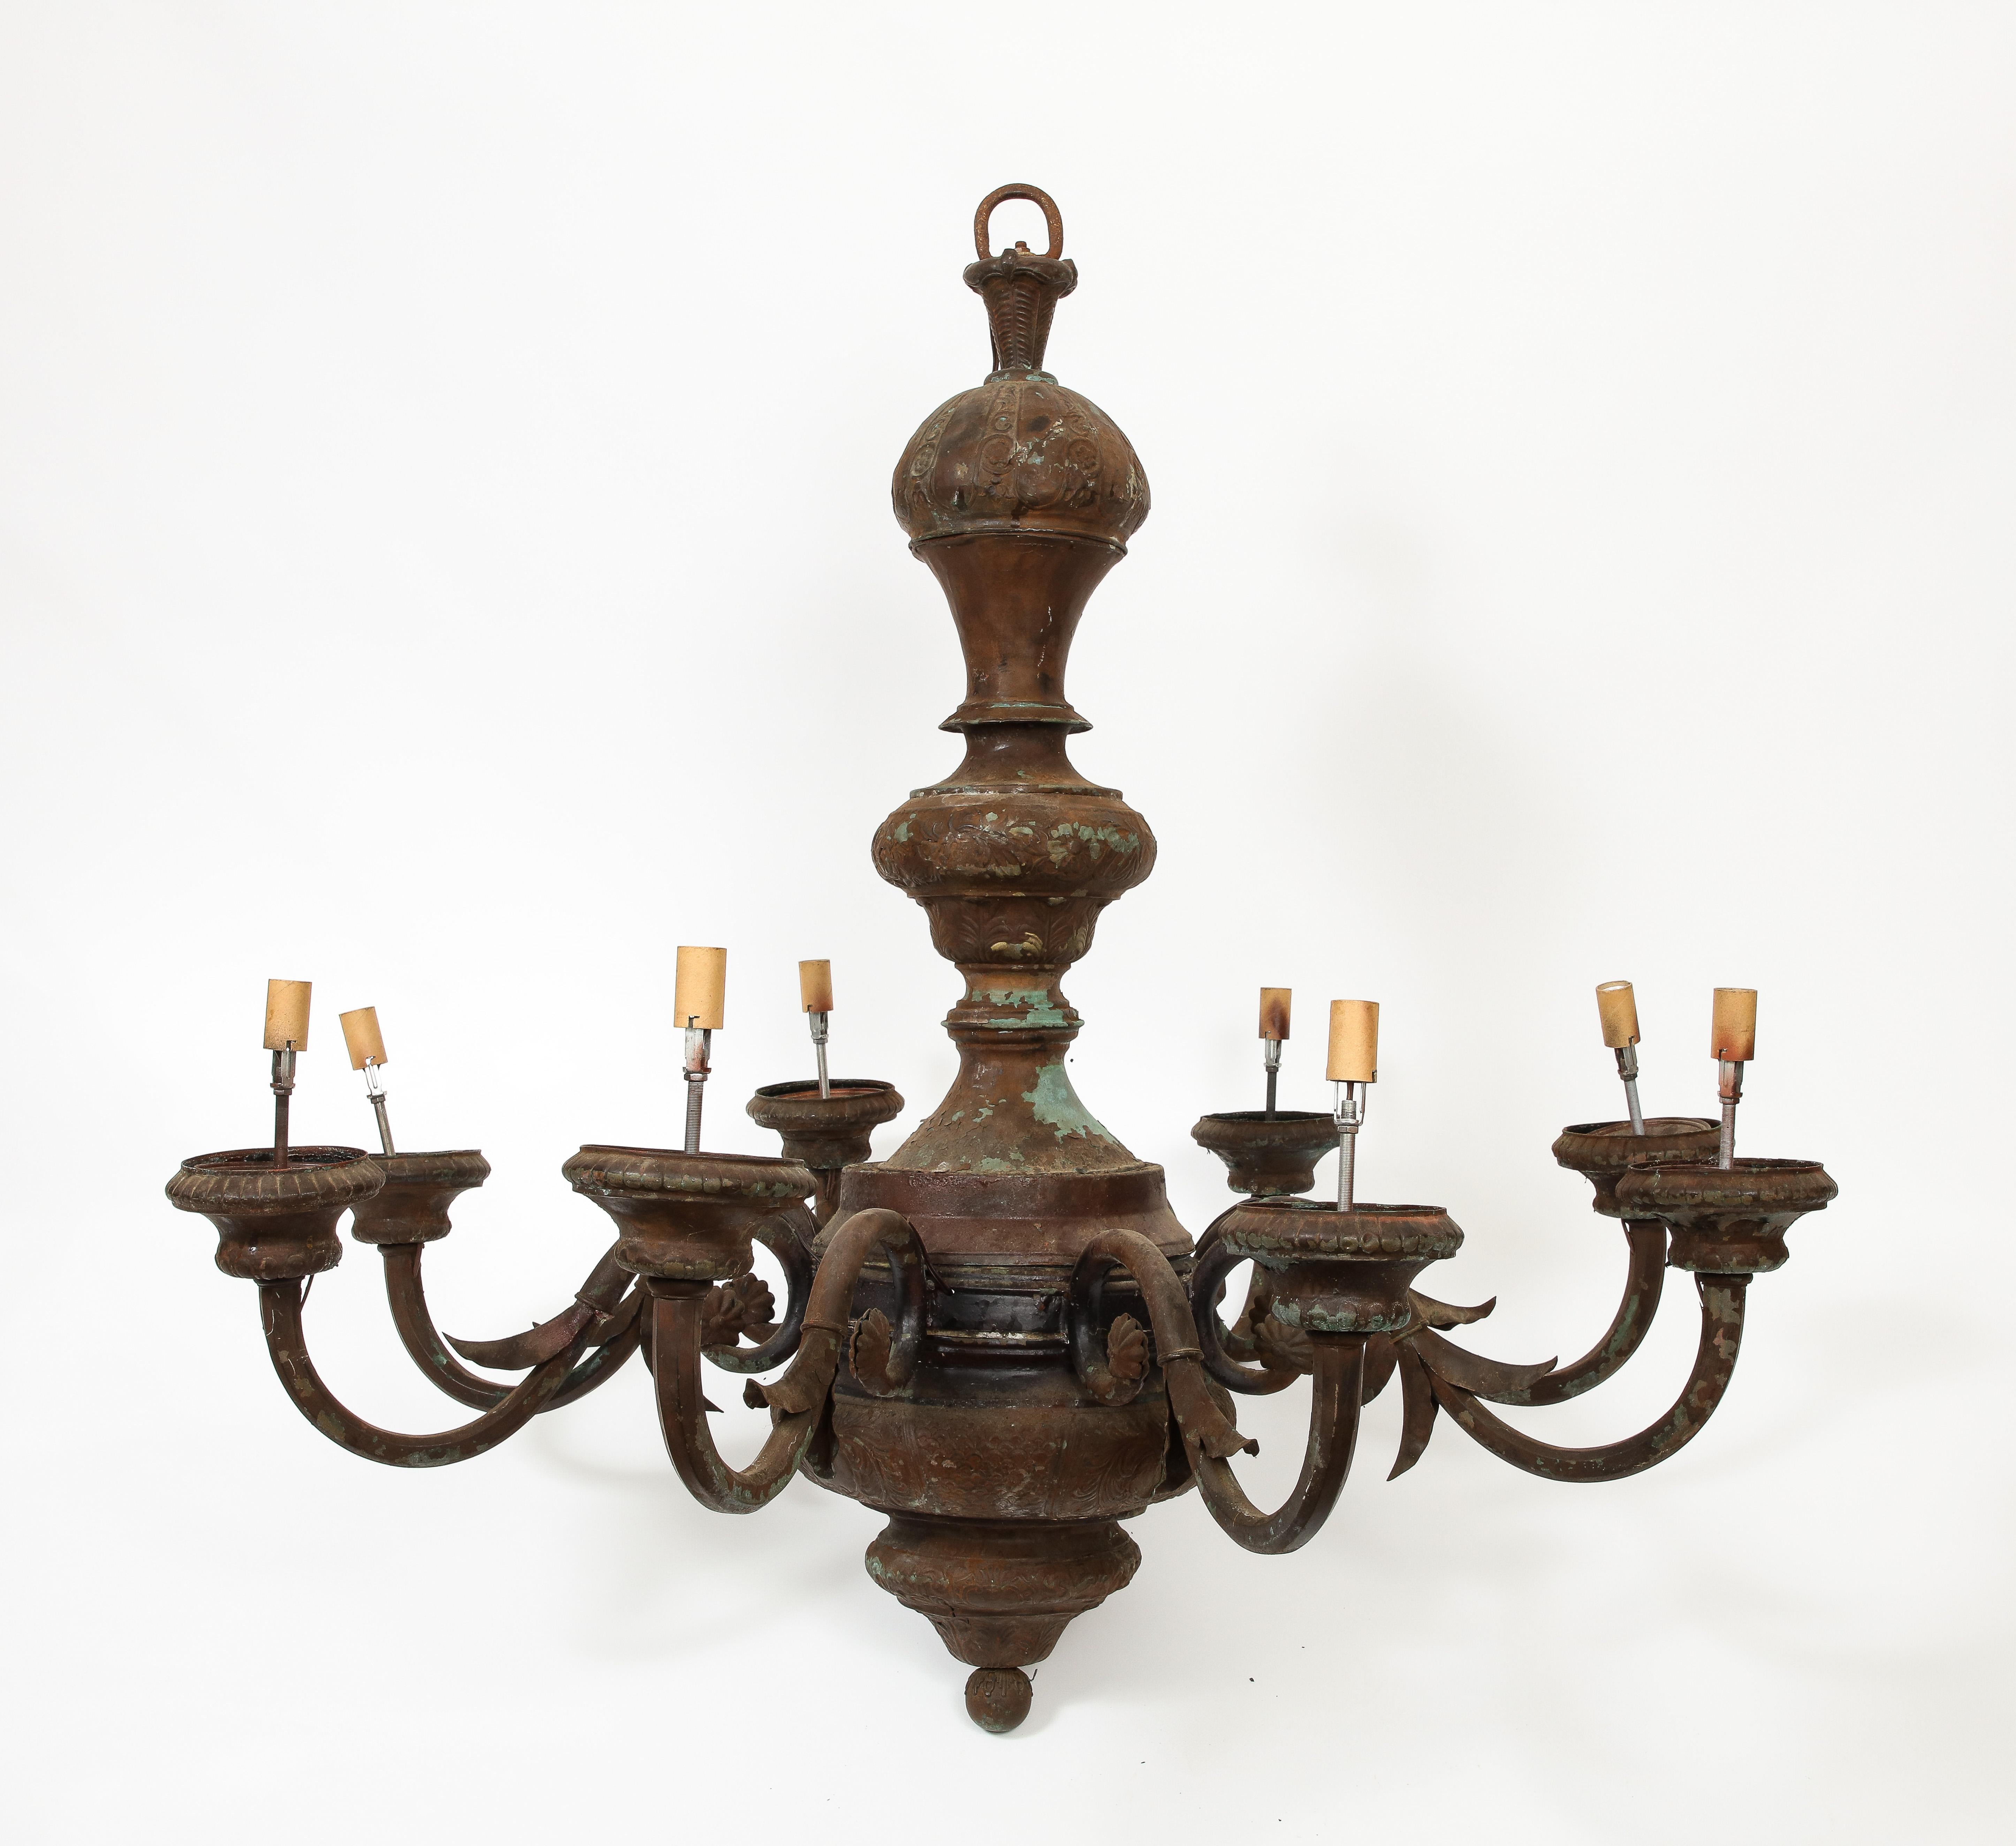 Antique 19th century English Verdigris Metal Light Fixture, 8 socket. Standard base, metal ring at top; the fixture is lighter than it looks as it is hollow. Shows patina/rust, paint losses. 